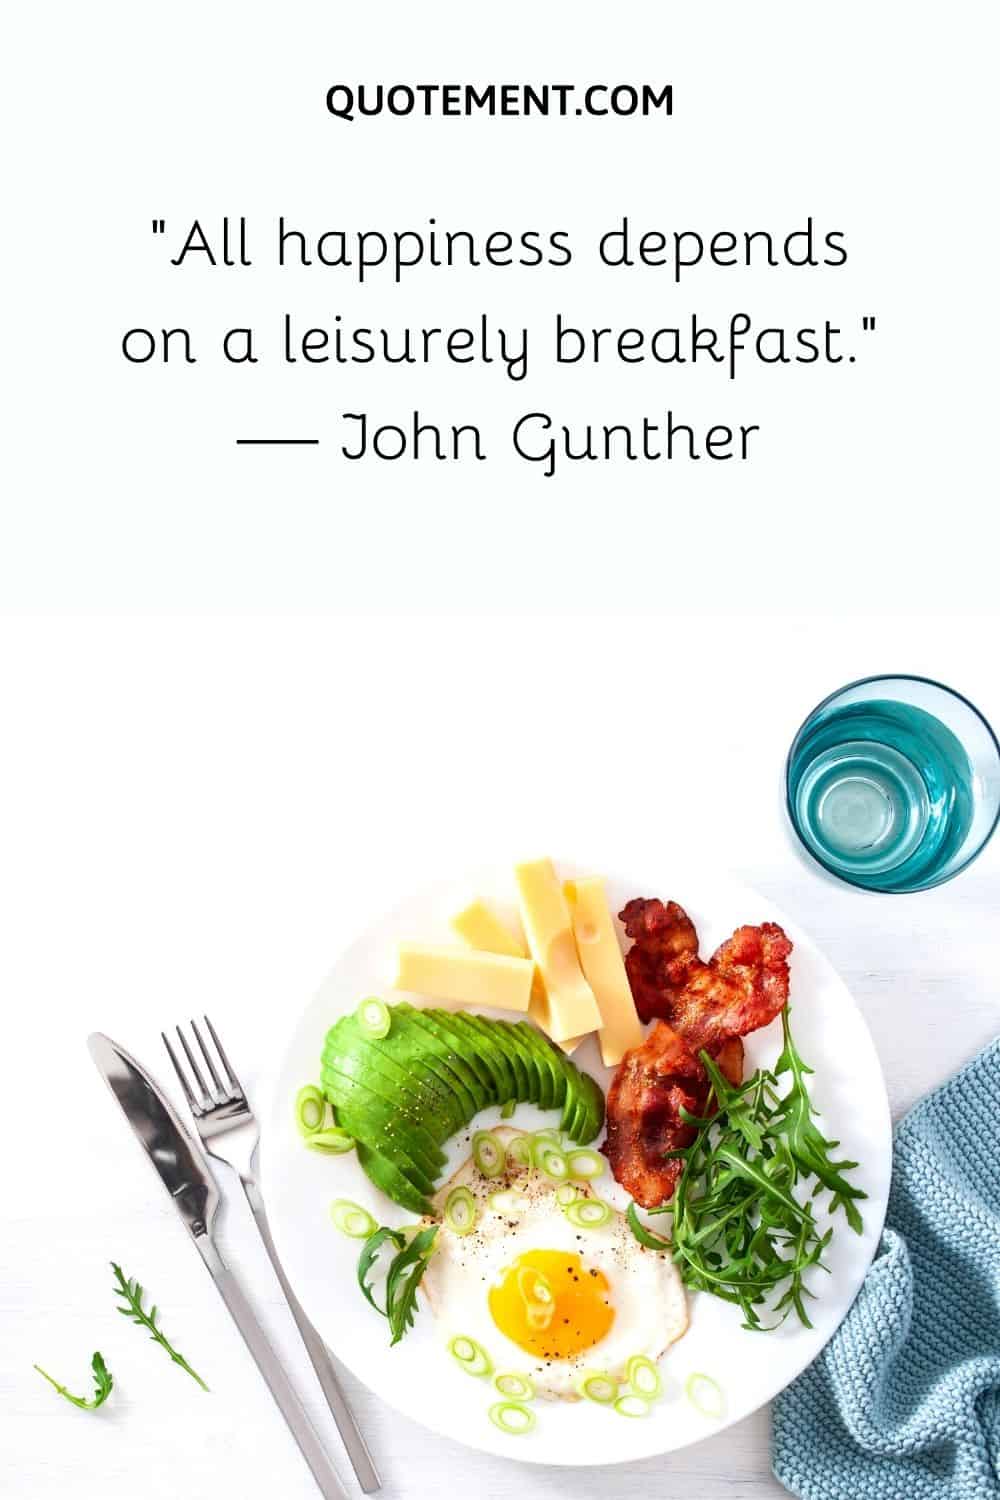 “All happiness depends on a leisurely breakfast.” — John Gunther